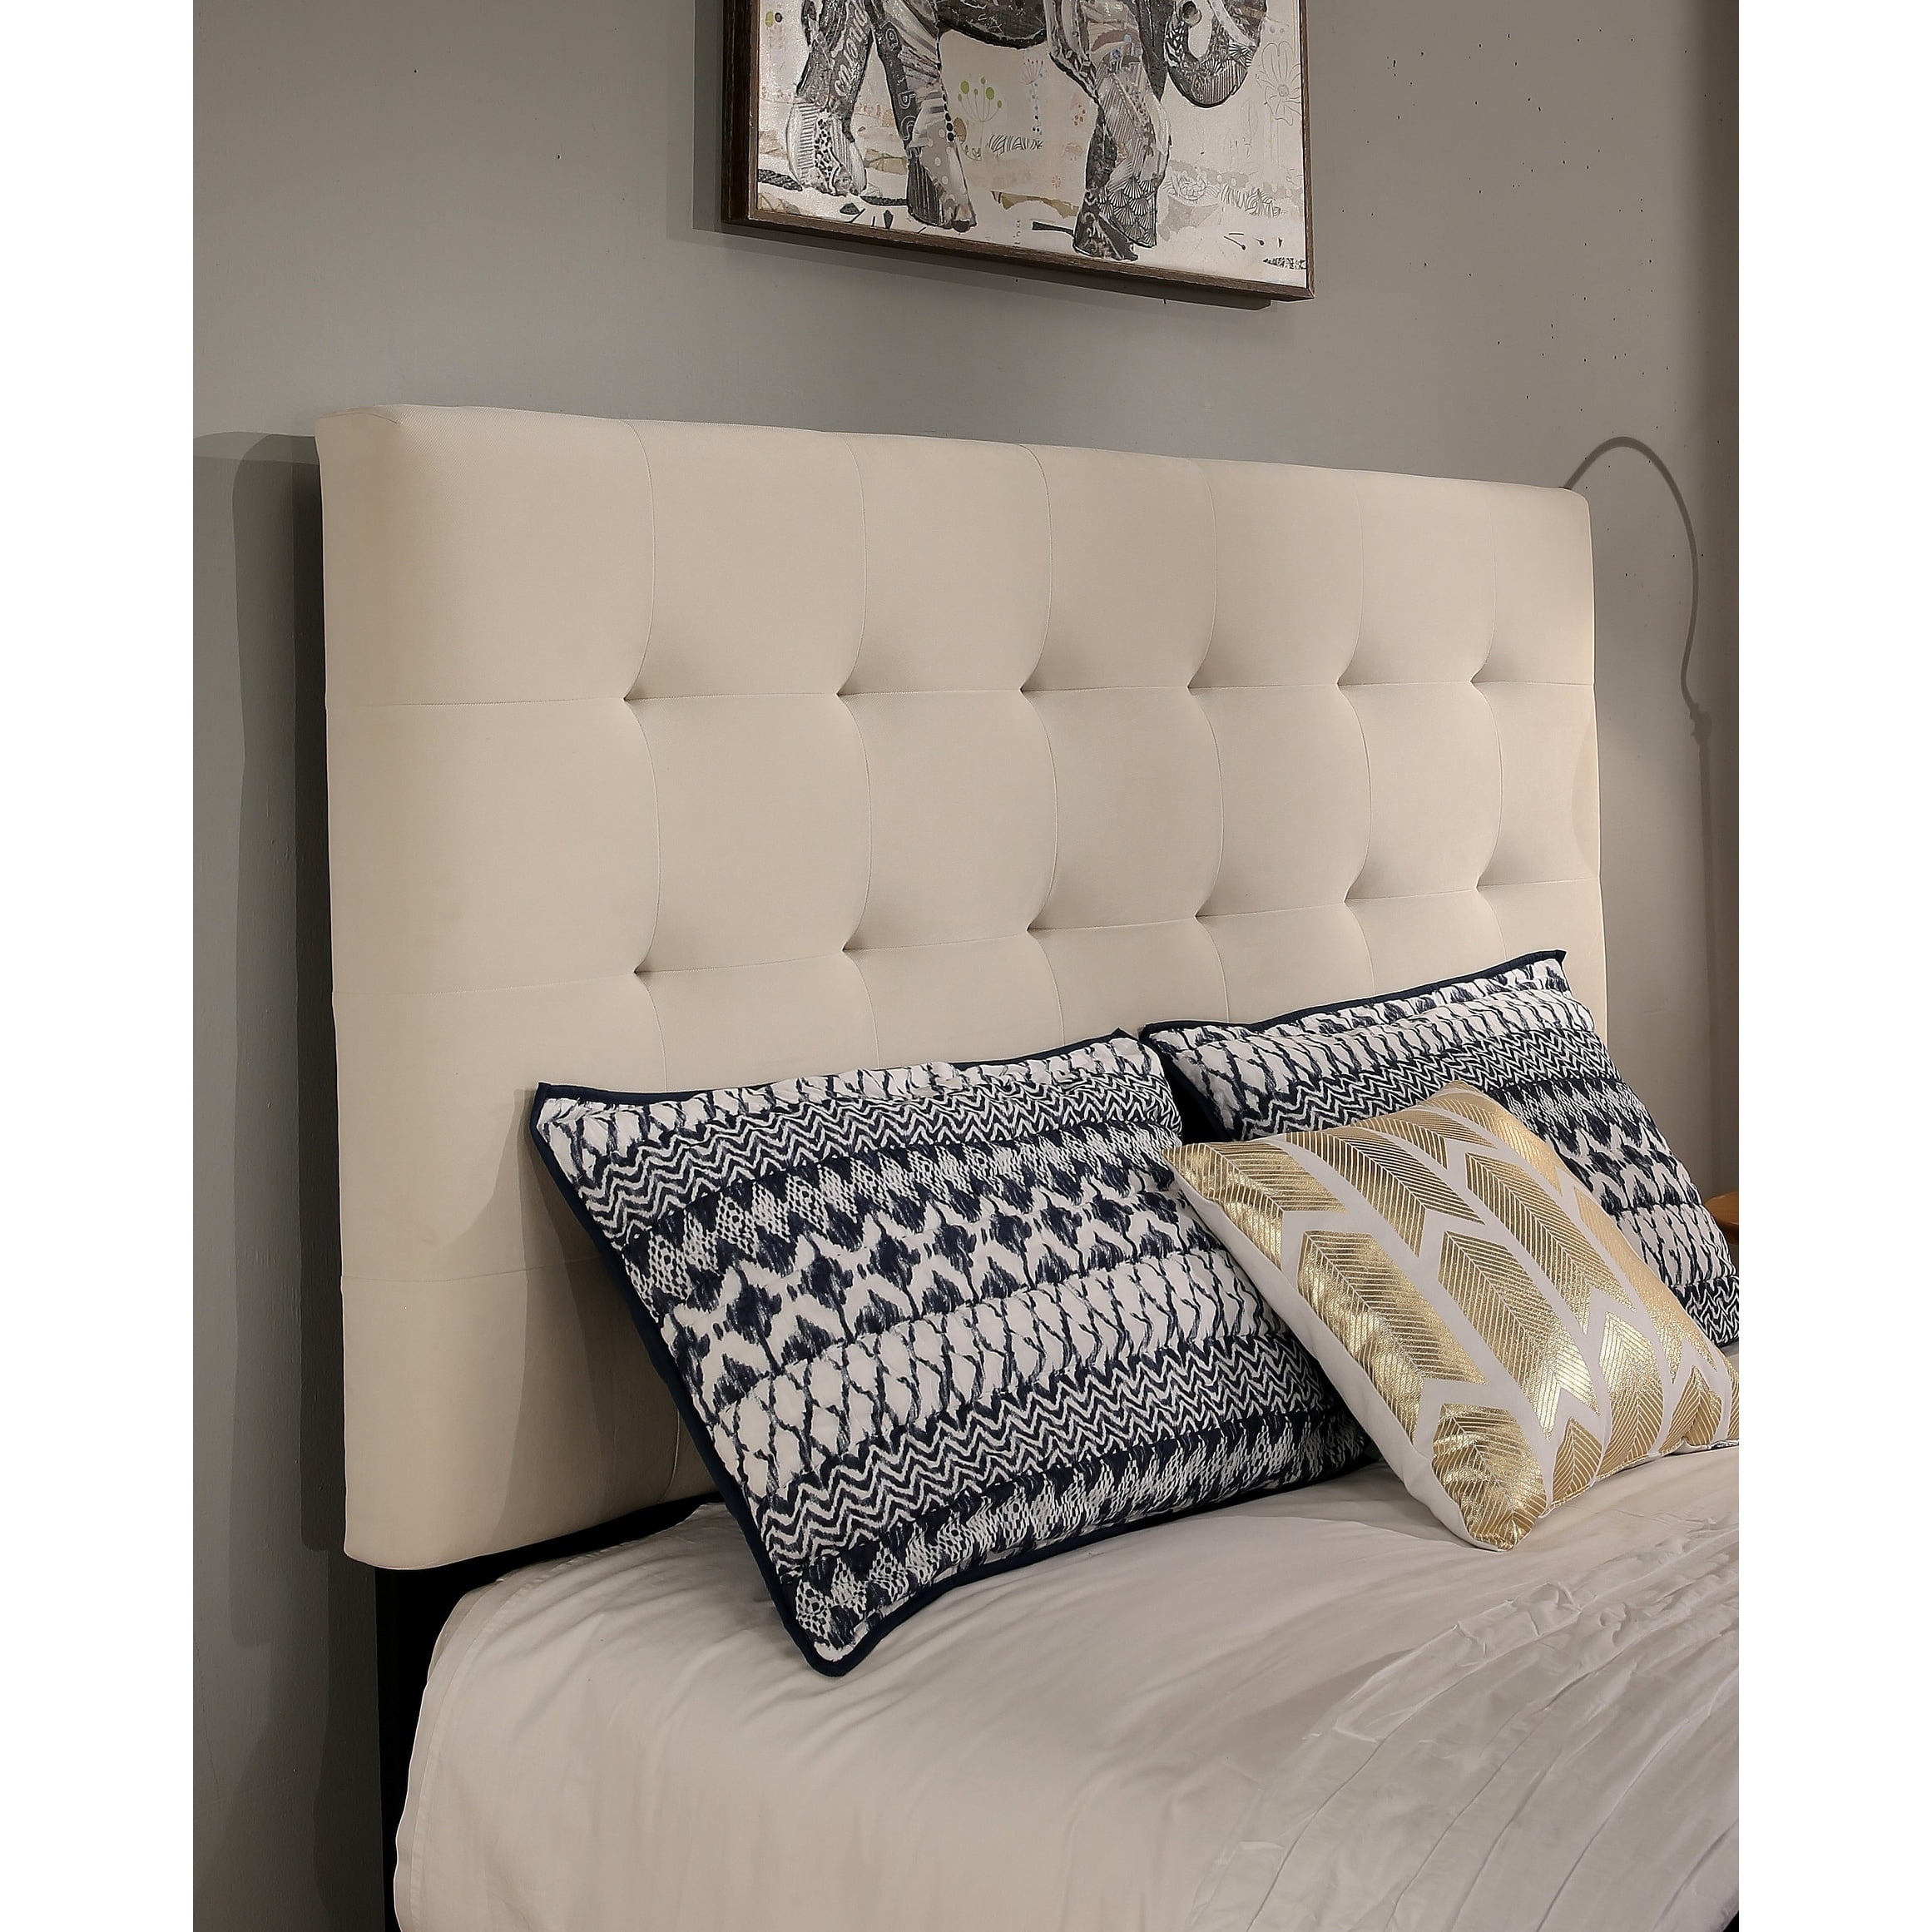 Manhattan Upholstered Tufted Headboard, How To Build A King Size Upholstered Headboard